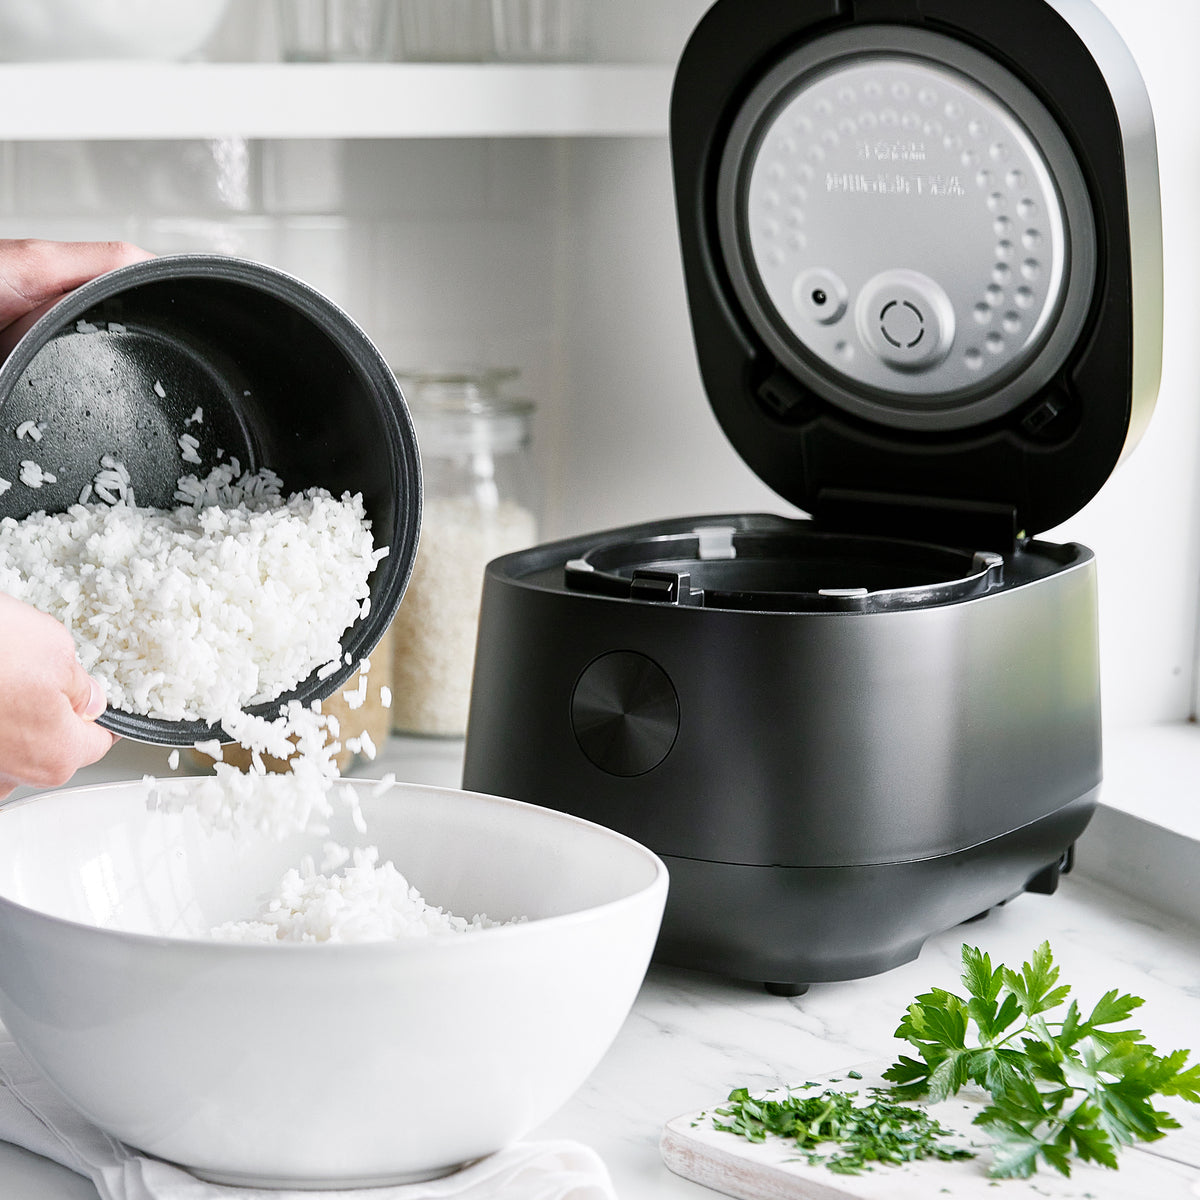 GreenPan Elite 8-Cup Induction Rice Cooker